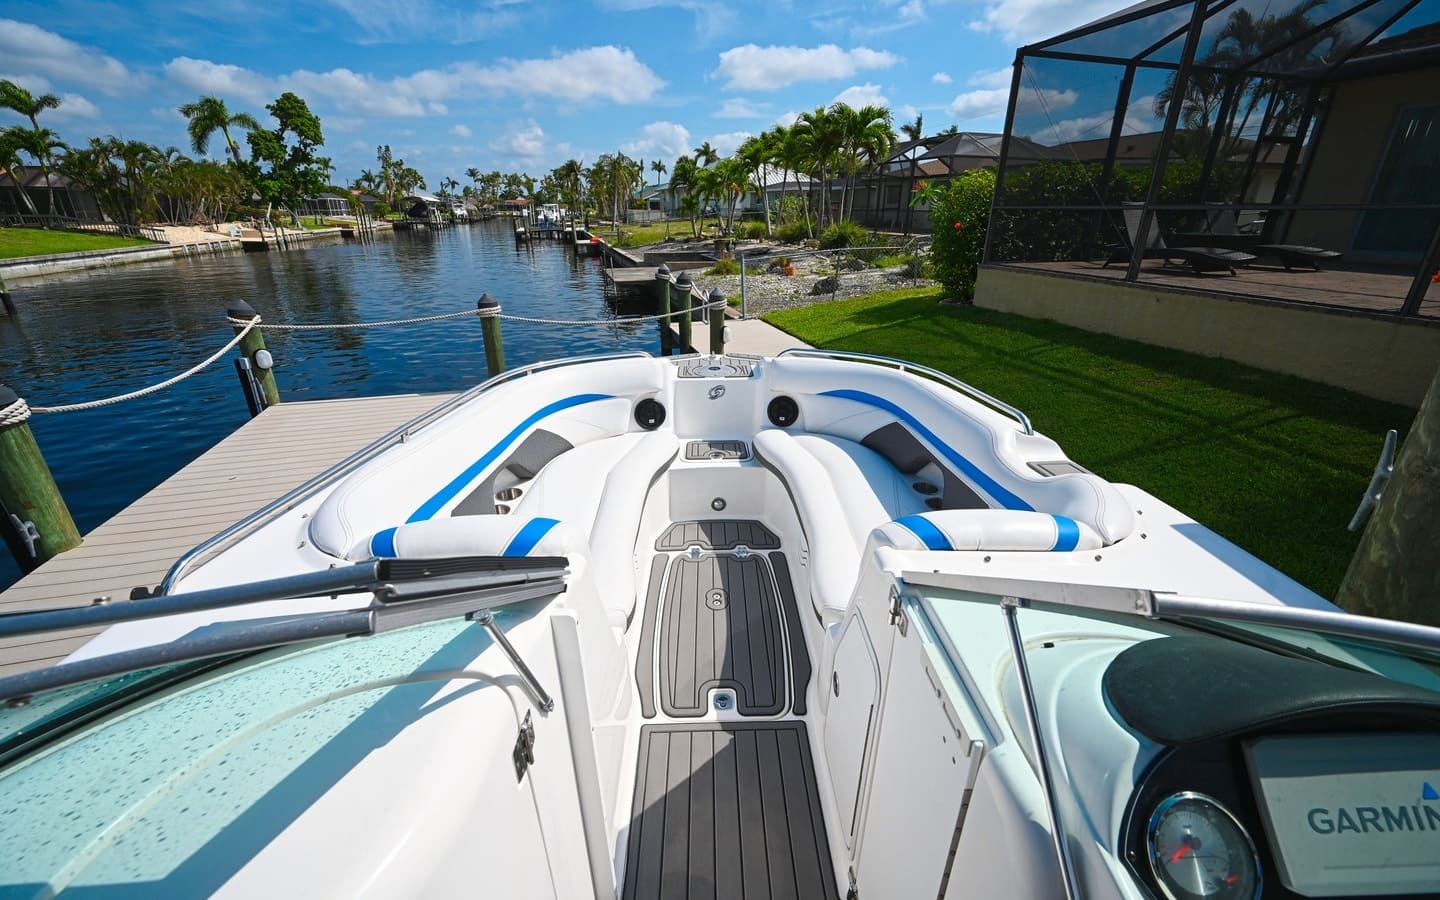 HURRICANE SD 2400 FOR RENT BY SPEED DOCK BOAT RENTAL